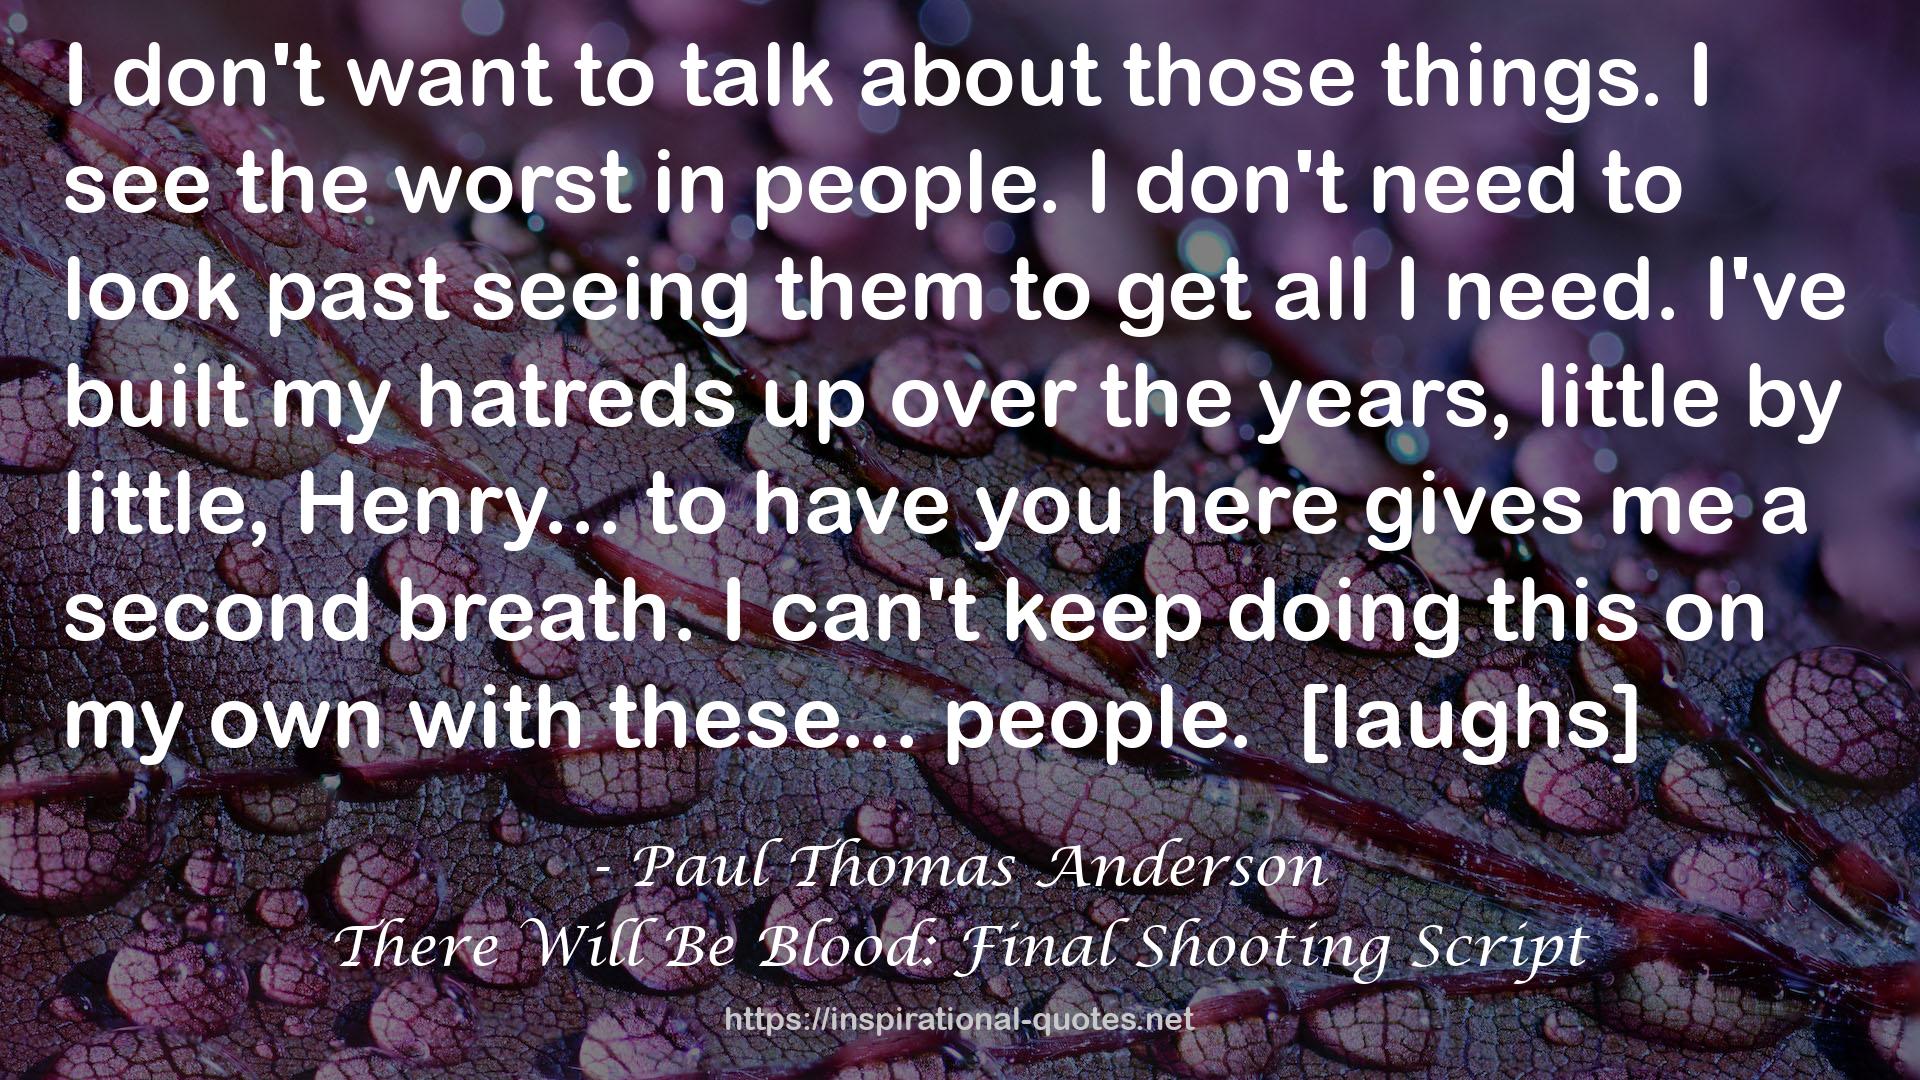 Paul Thomas Anderson QUOTES